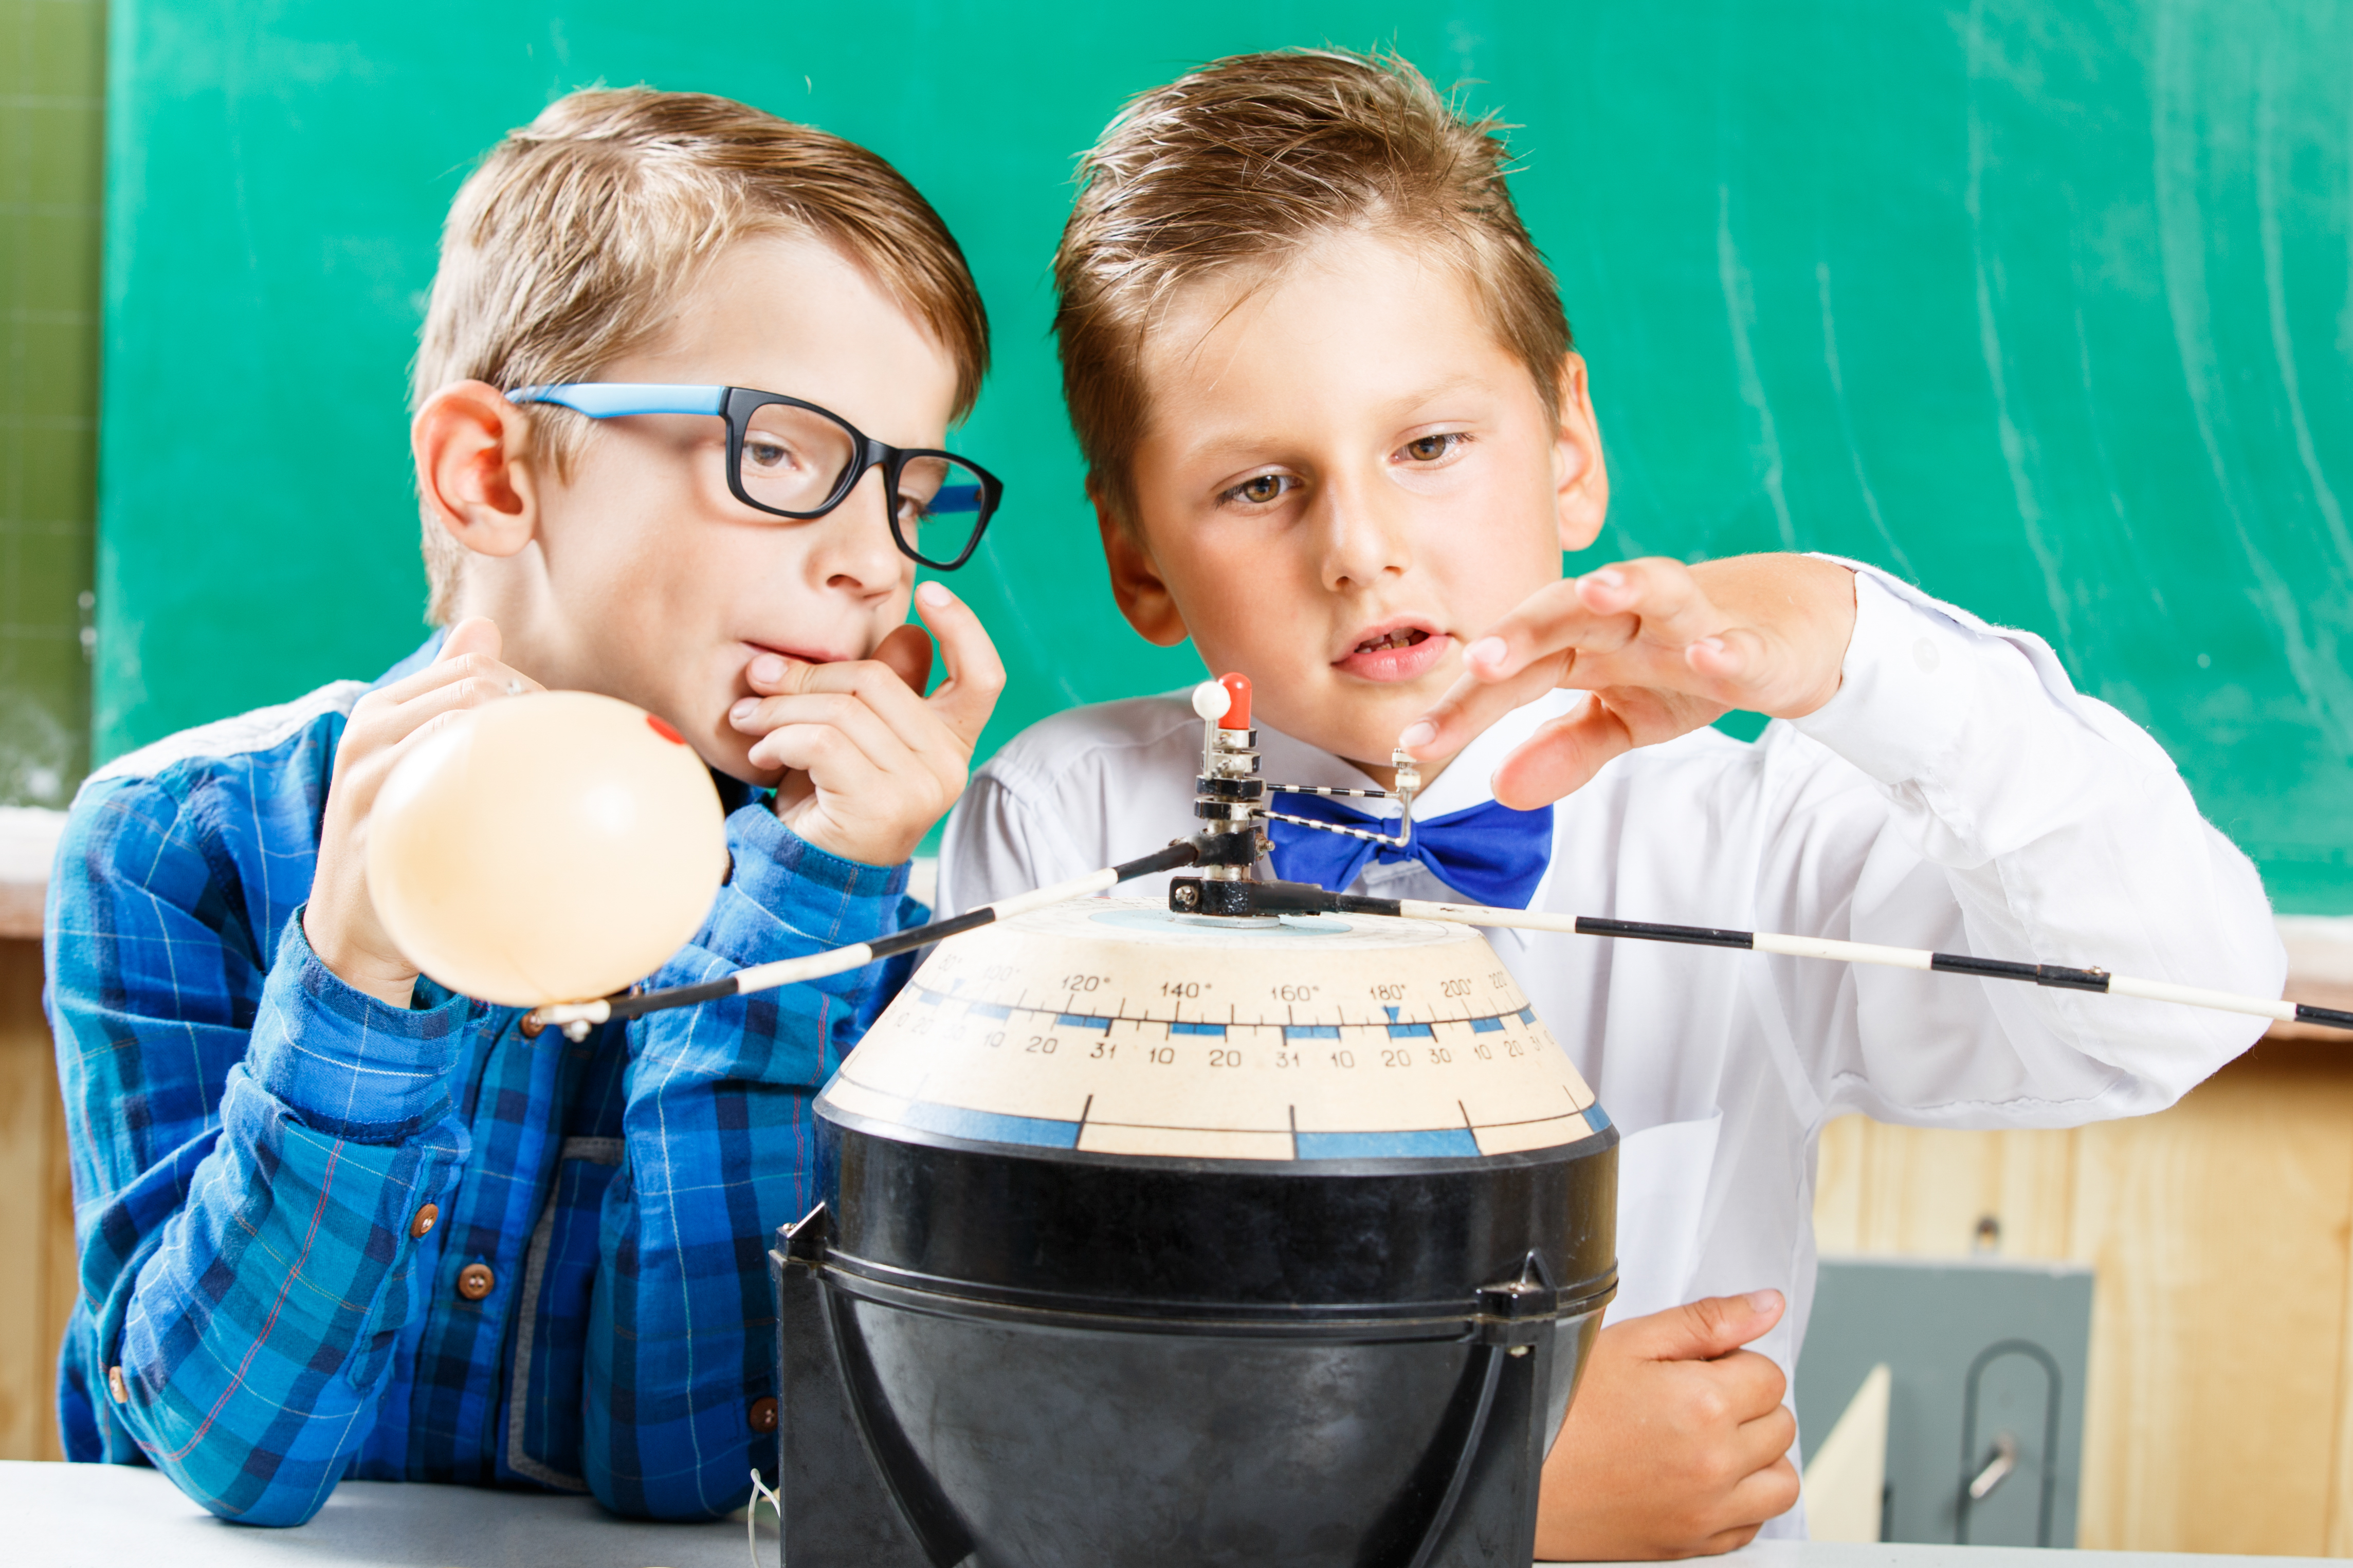 Fun Physics Experiments for Kids image